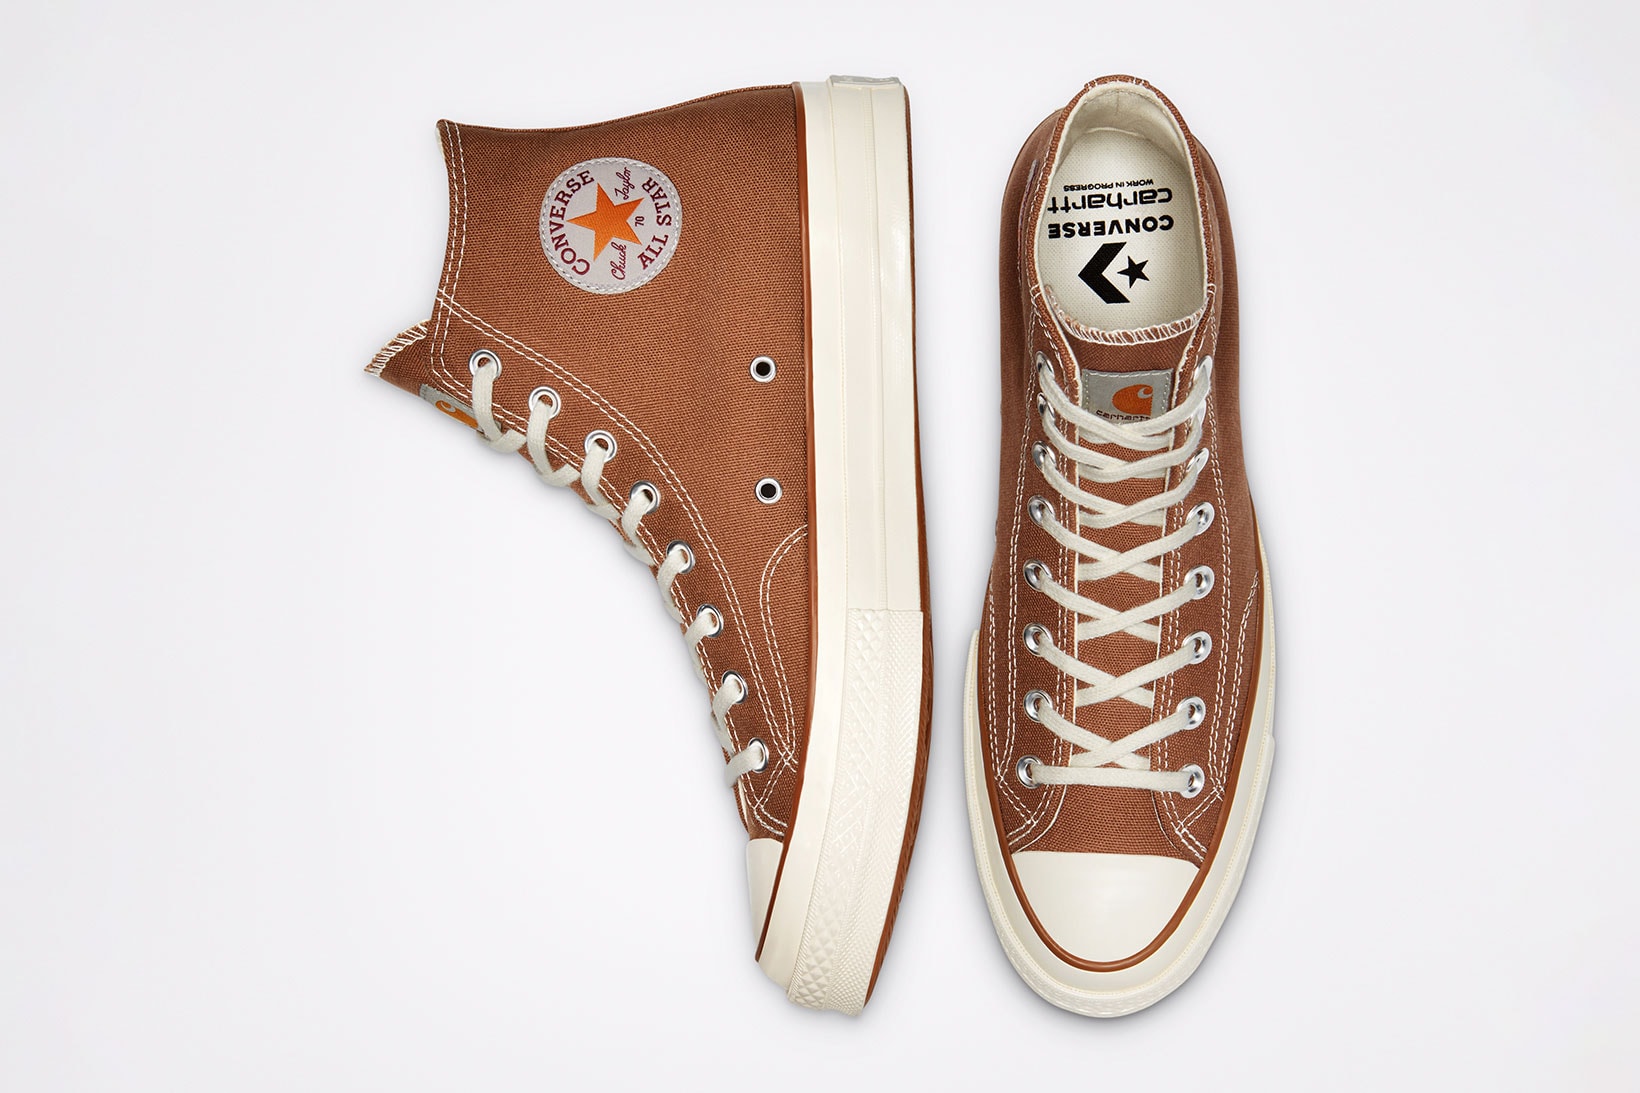 carhartt wip converse chuck 70 icons collaboration sneakers hamilton brown canvas logo side top toe box insoles